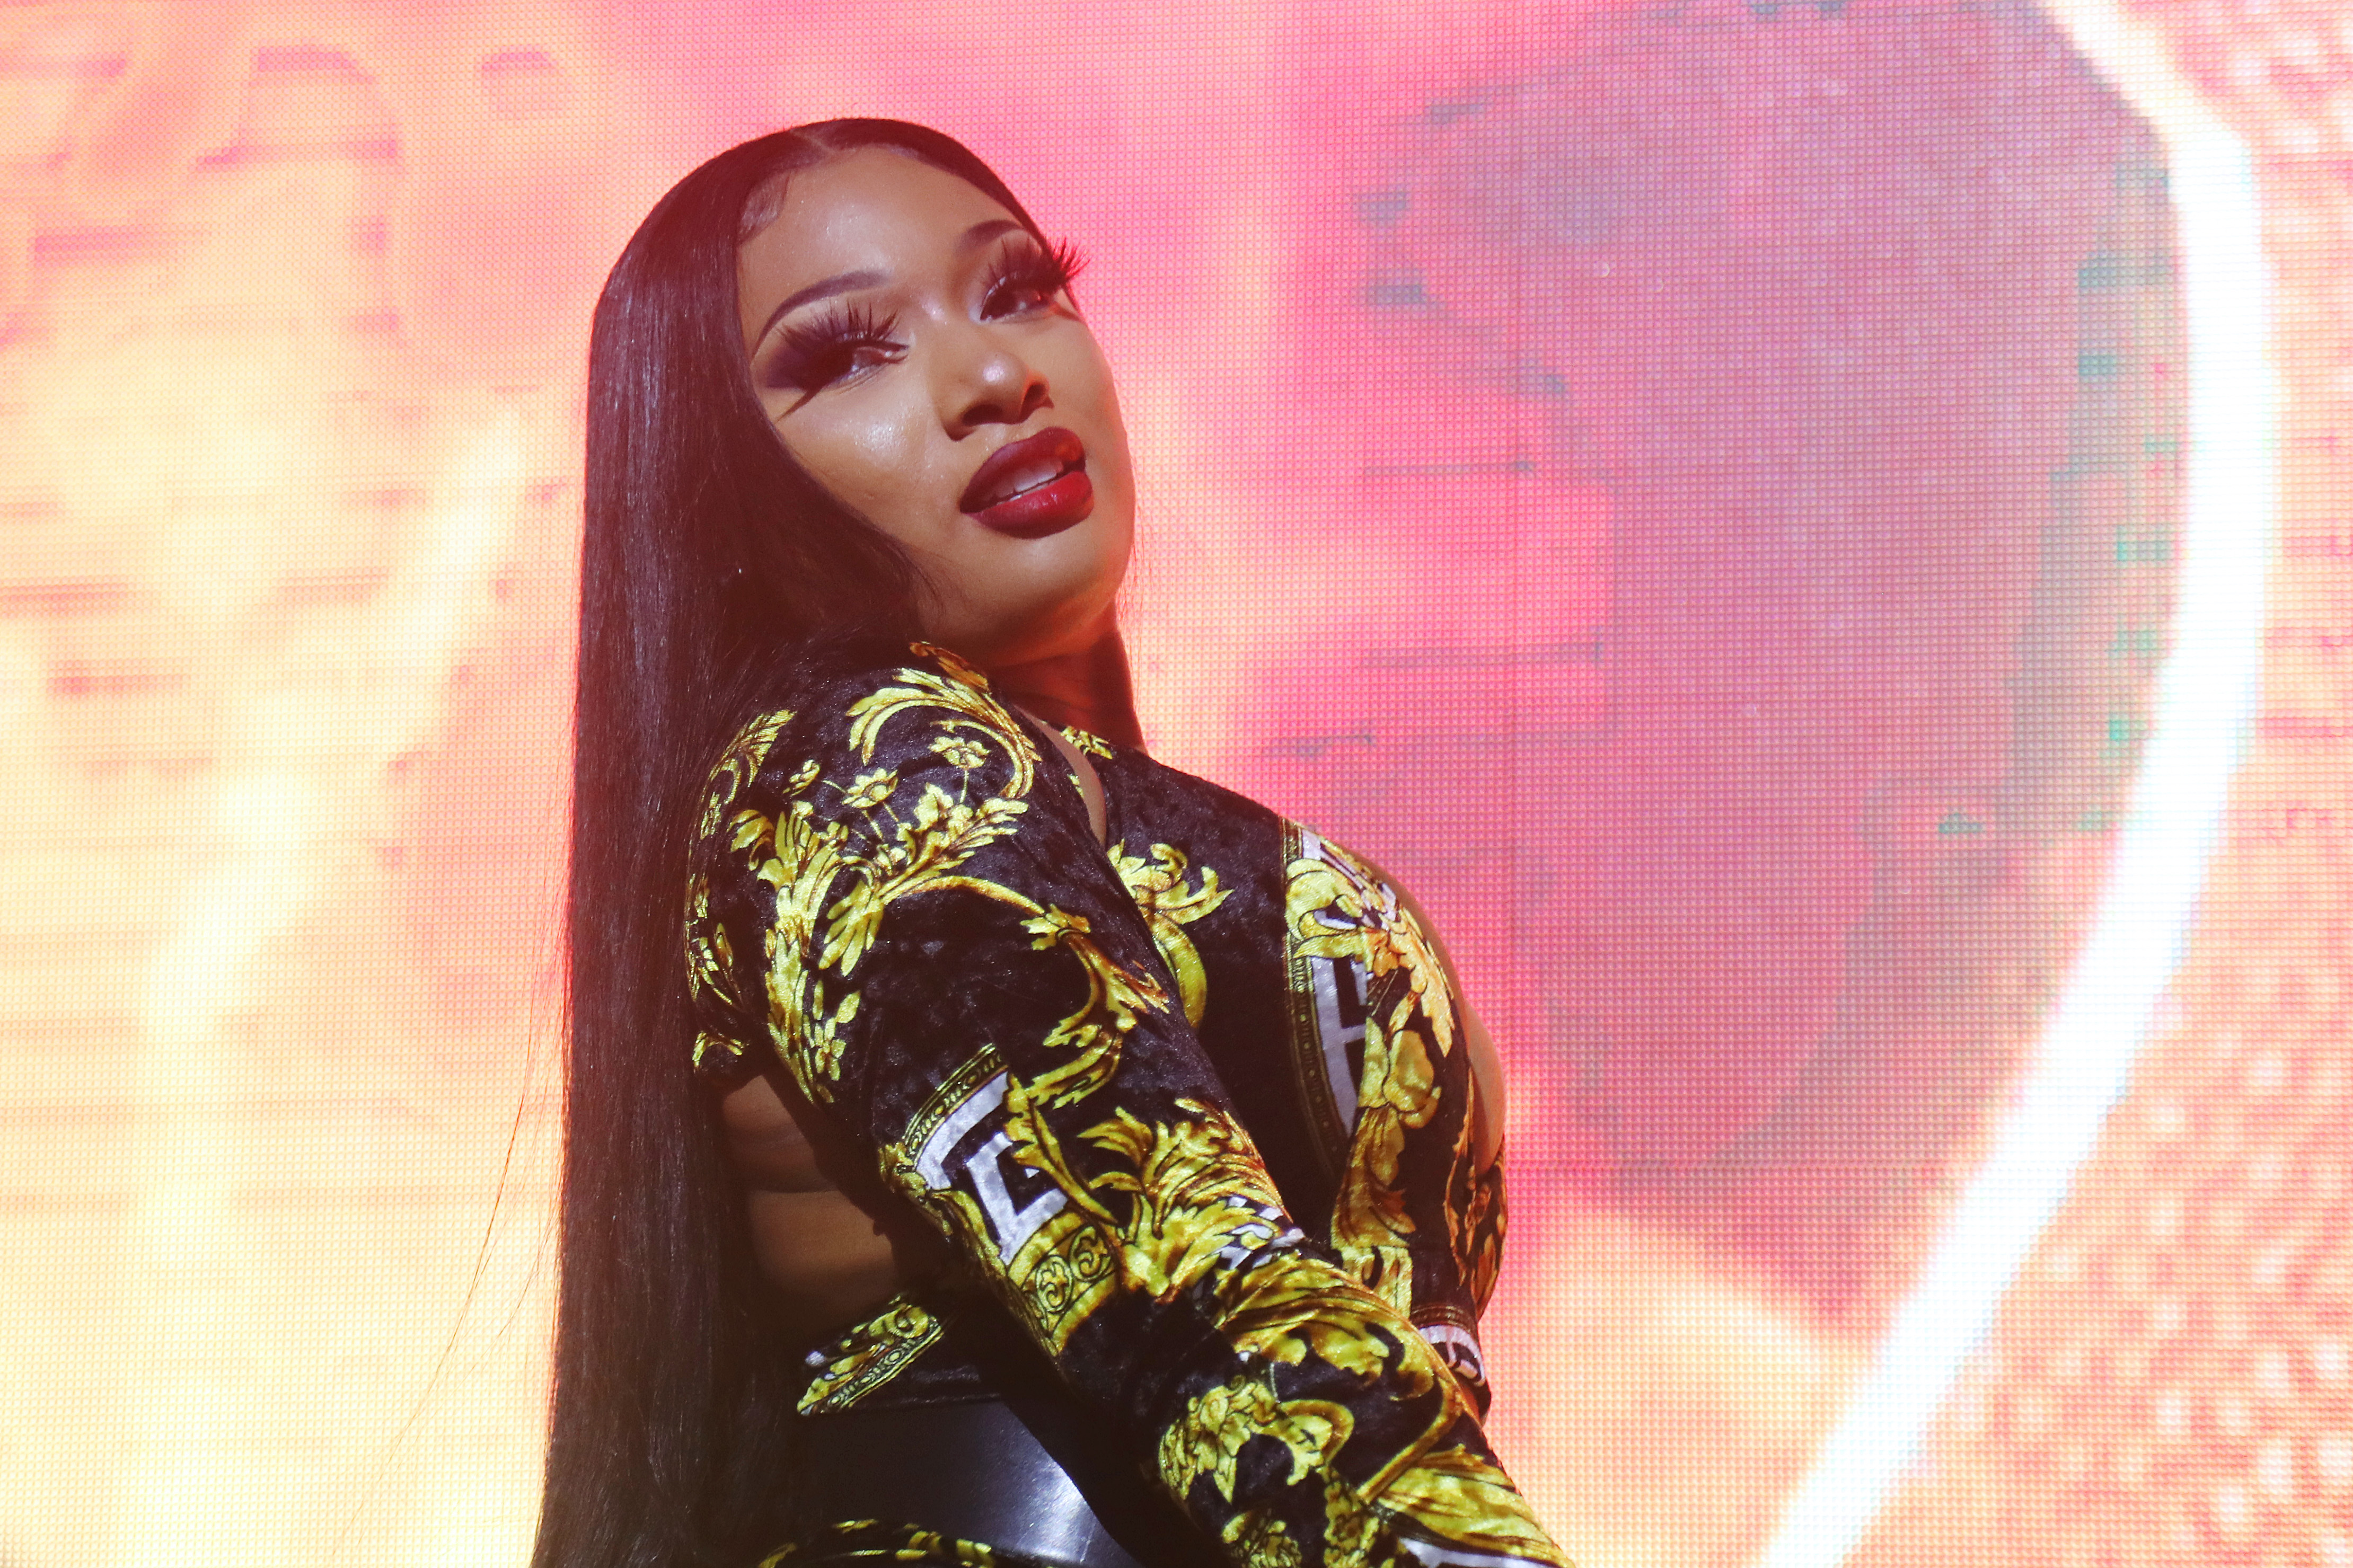 Megan Thee Stallion Addresses Tory Lanez Shooting: 'I Have Truly Survived the Unimaginable'